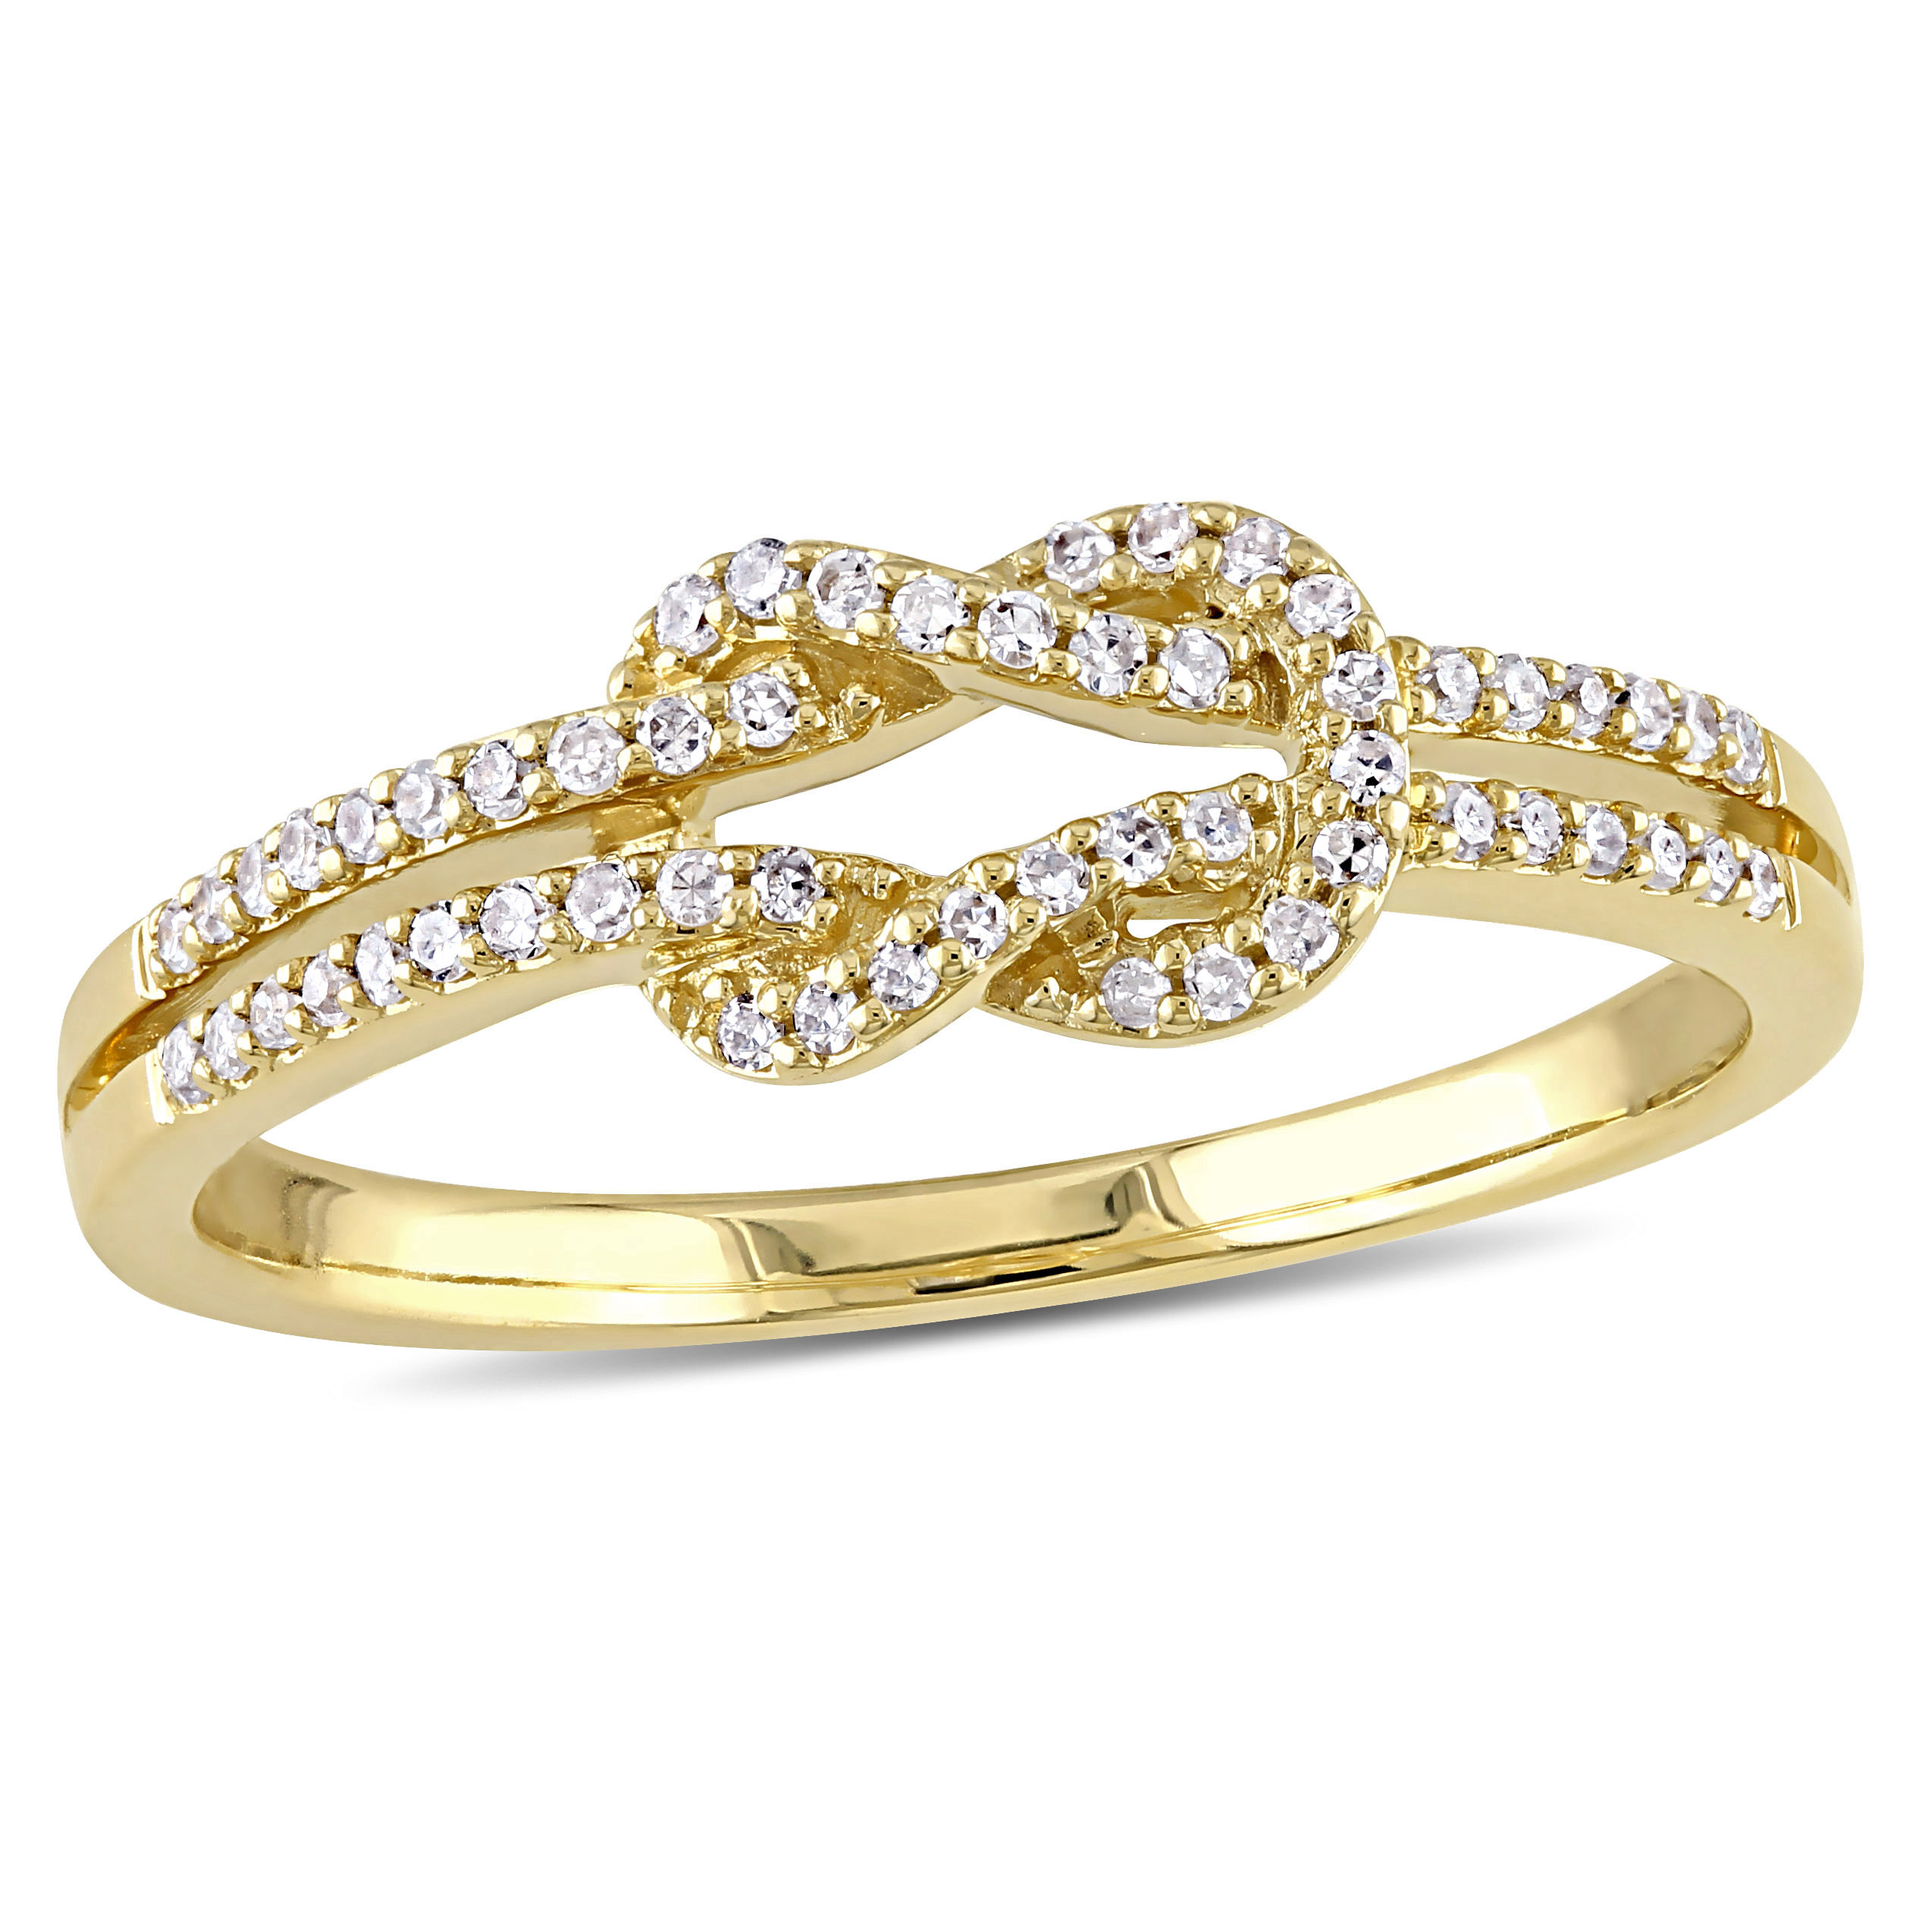 1/6 CT TW Diamond Double Knot Ring in 14k Yellow Gold